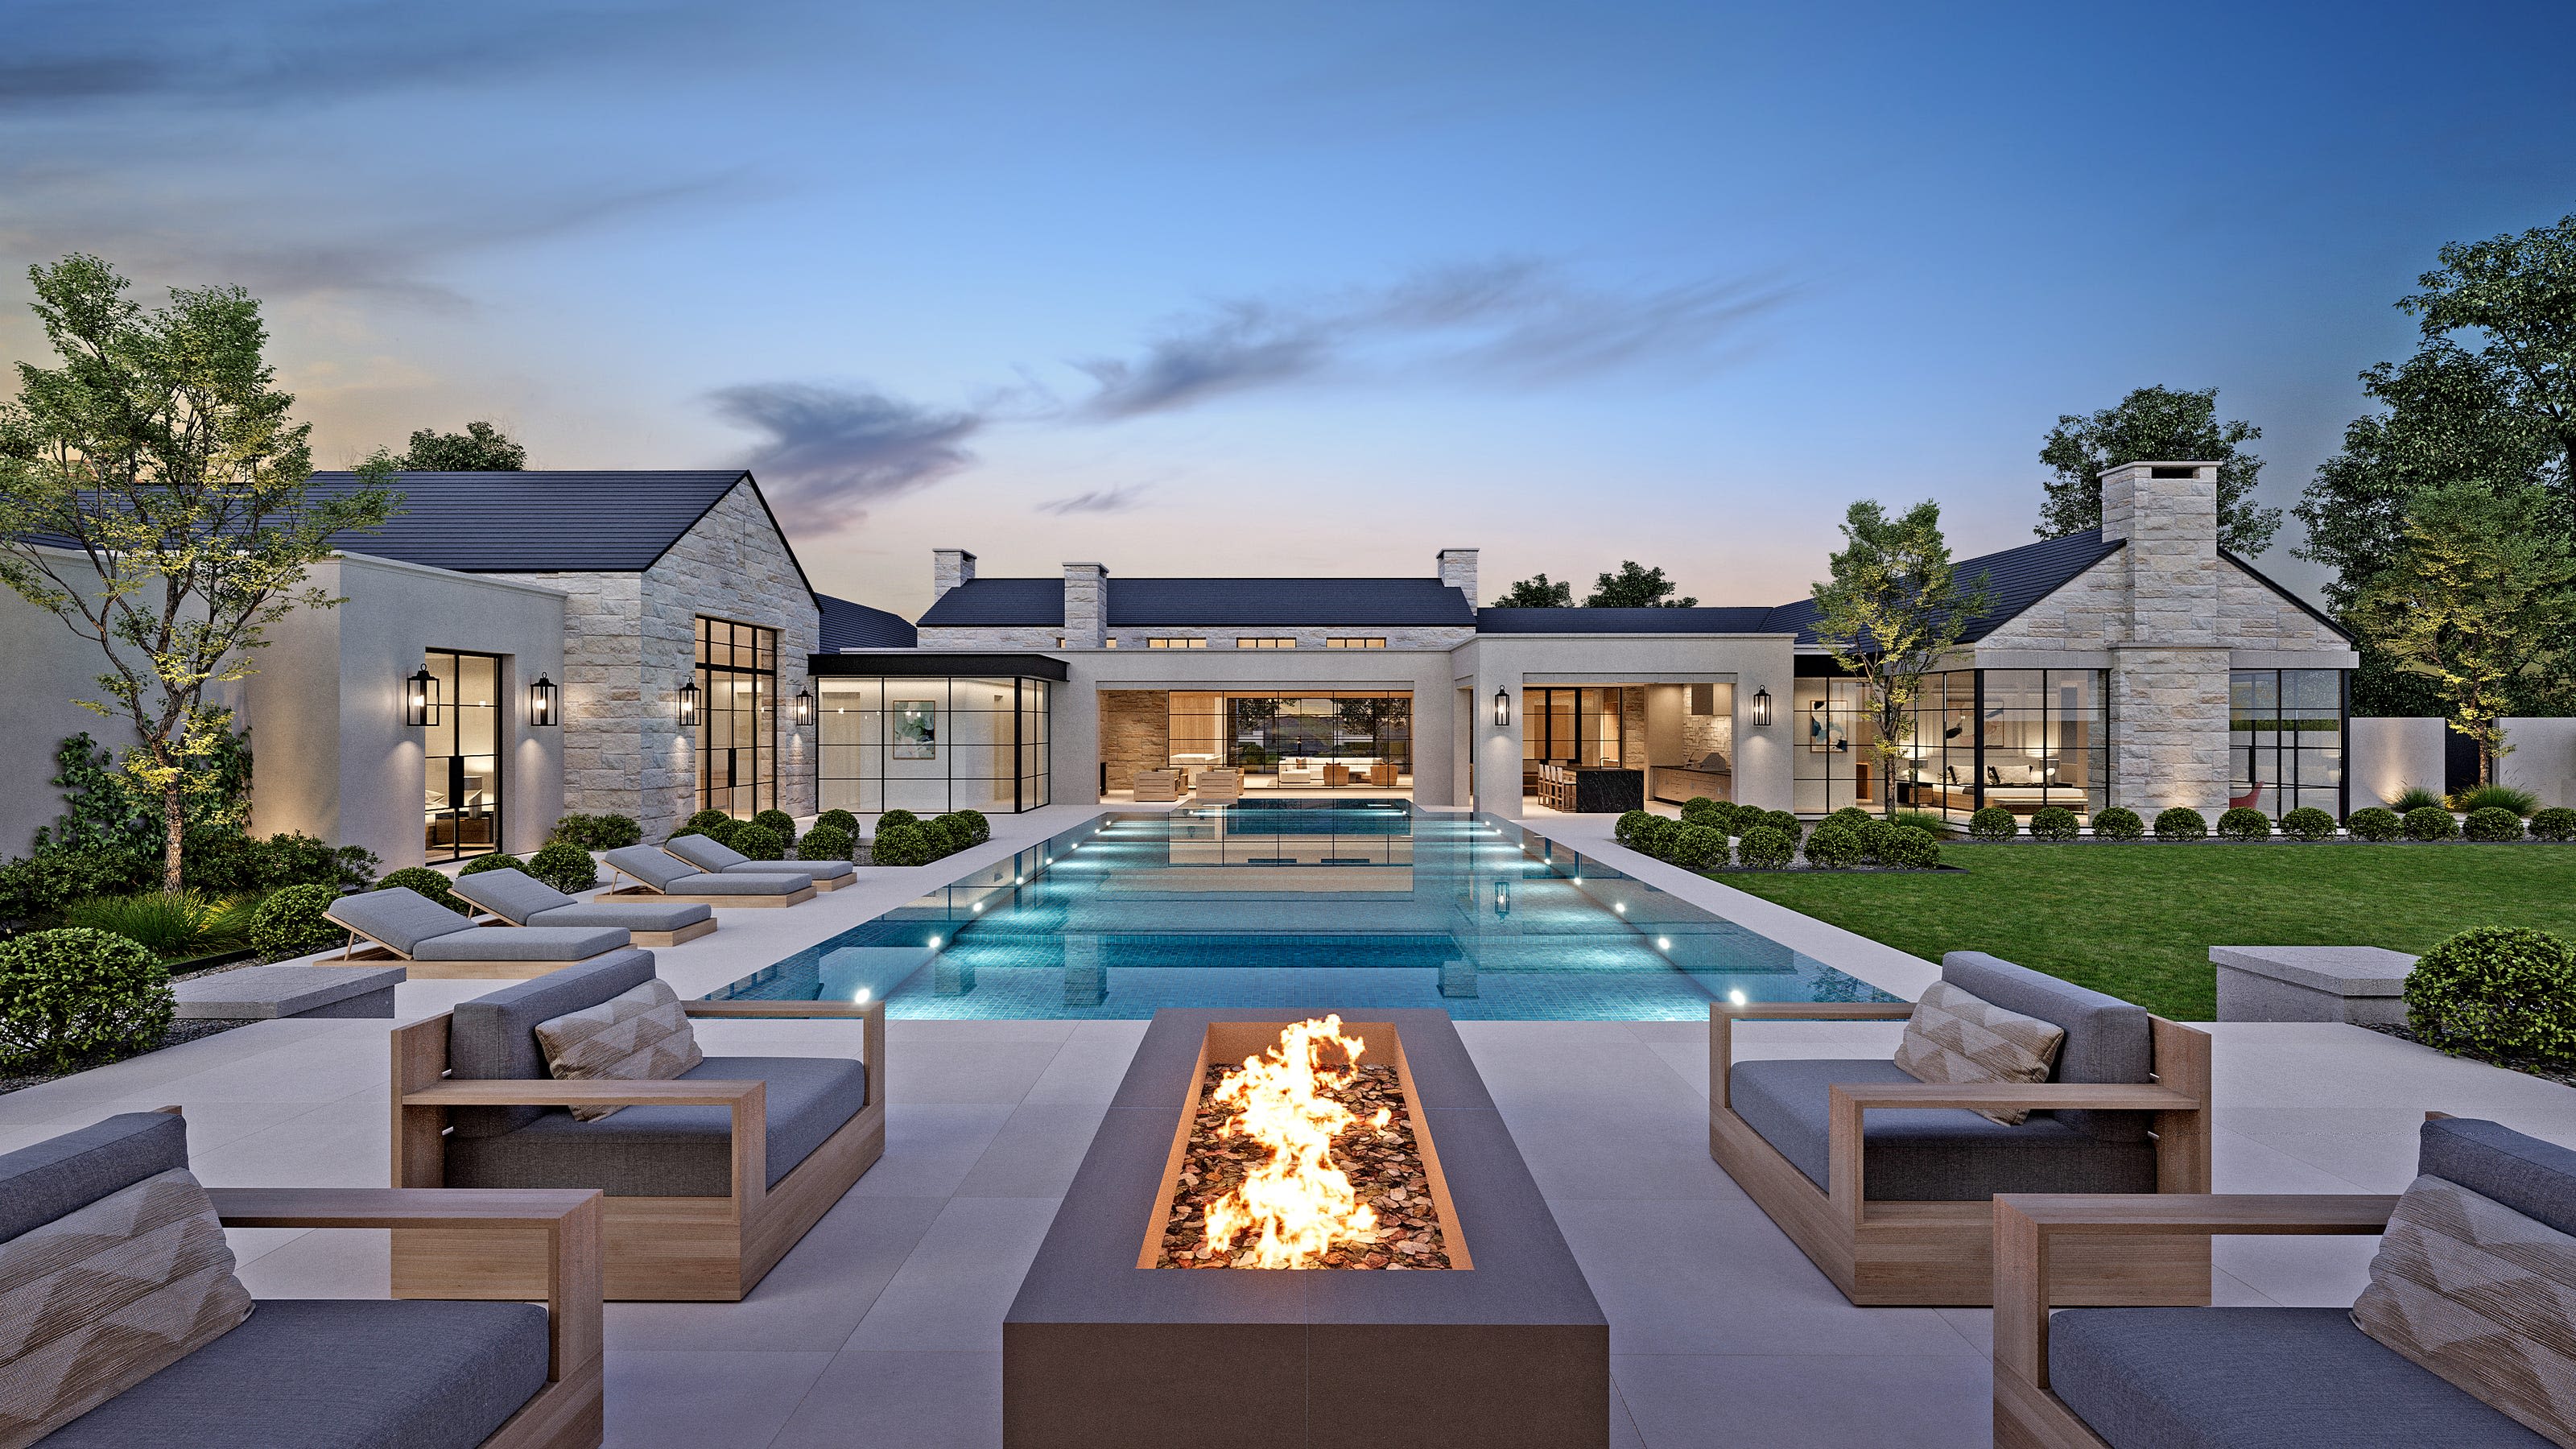 First home in new Paradise Valley community is $18M, 12,000-square-foot mansion